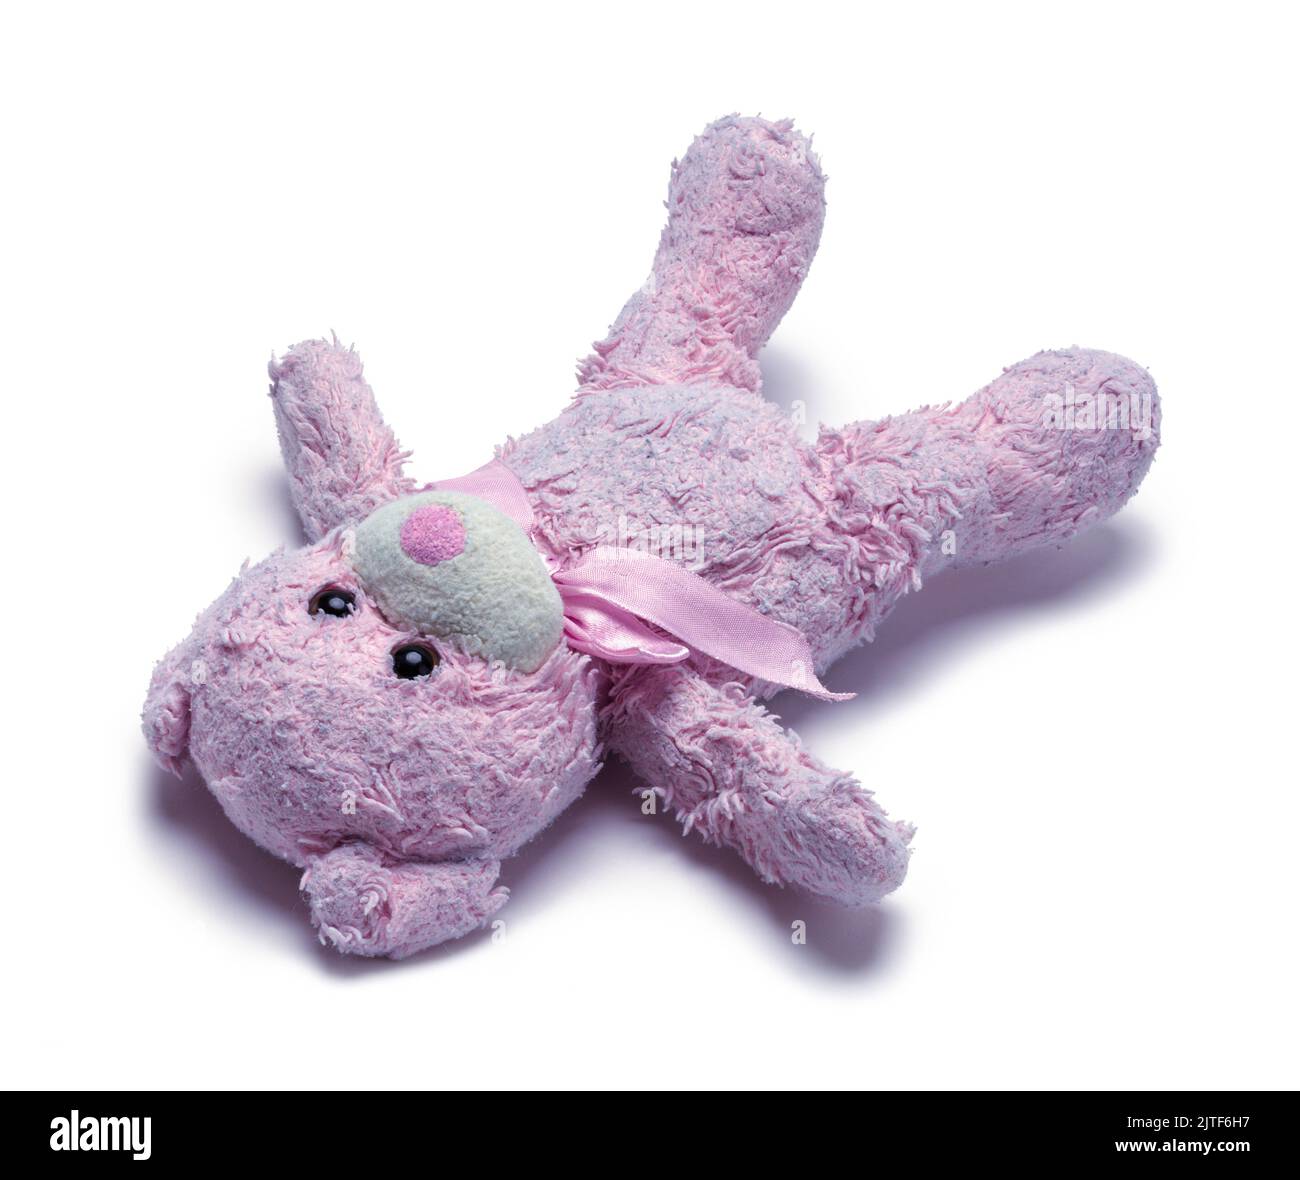 Old Lost Pink Teddy Bear Cut. Banque D'Images